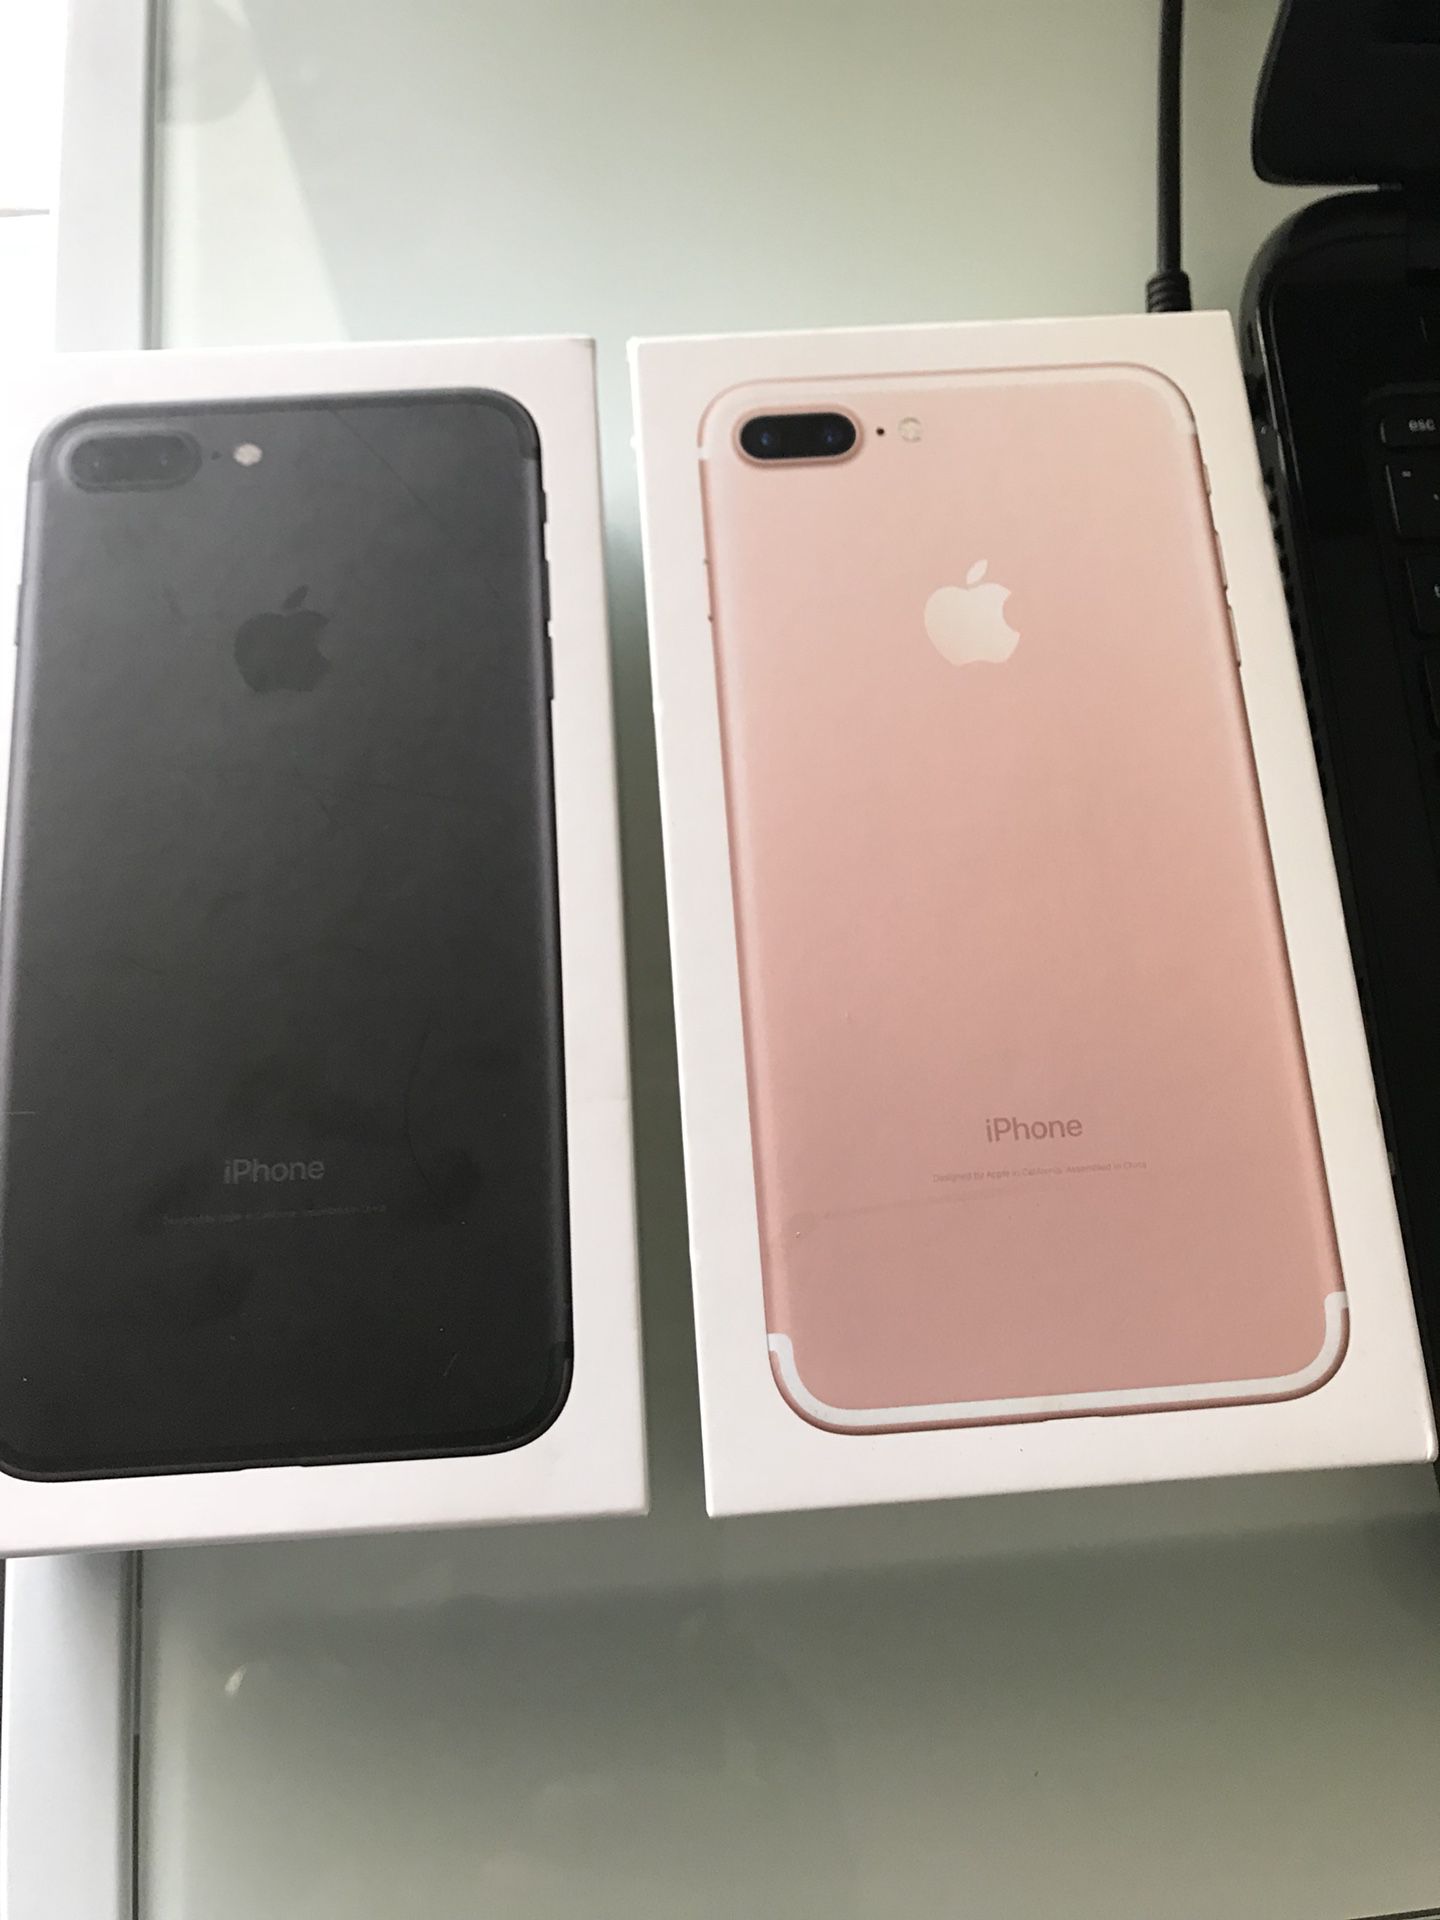 Sequel henvise Army IPhone 7 7+ Plus Box Original Apple Retail Box Only Without Accessories No  Phone for Sale in West Palm Beach, FL - OfferUp